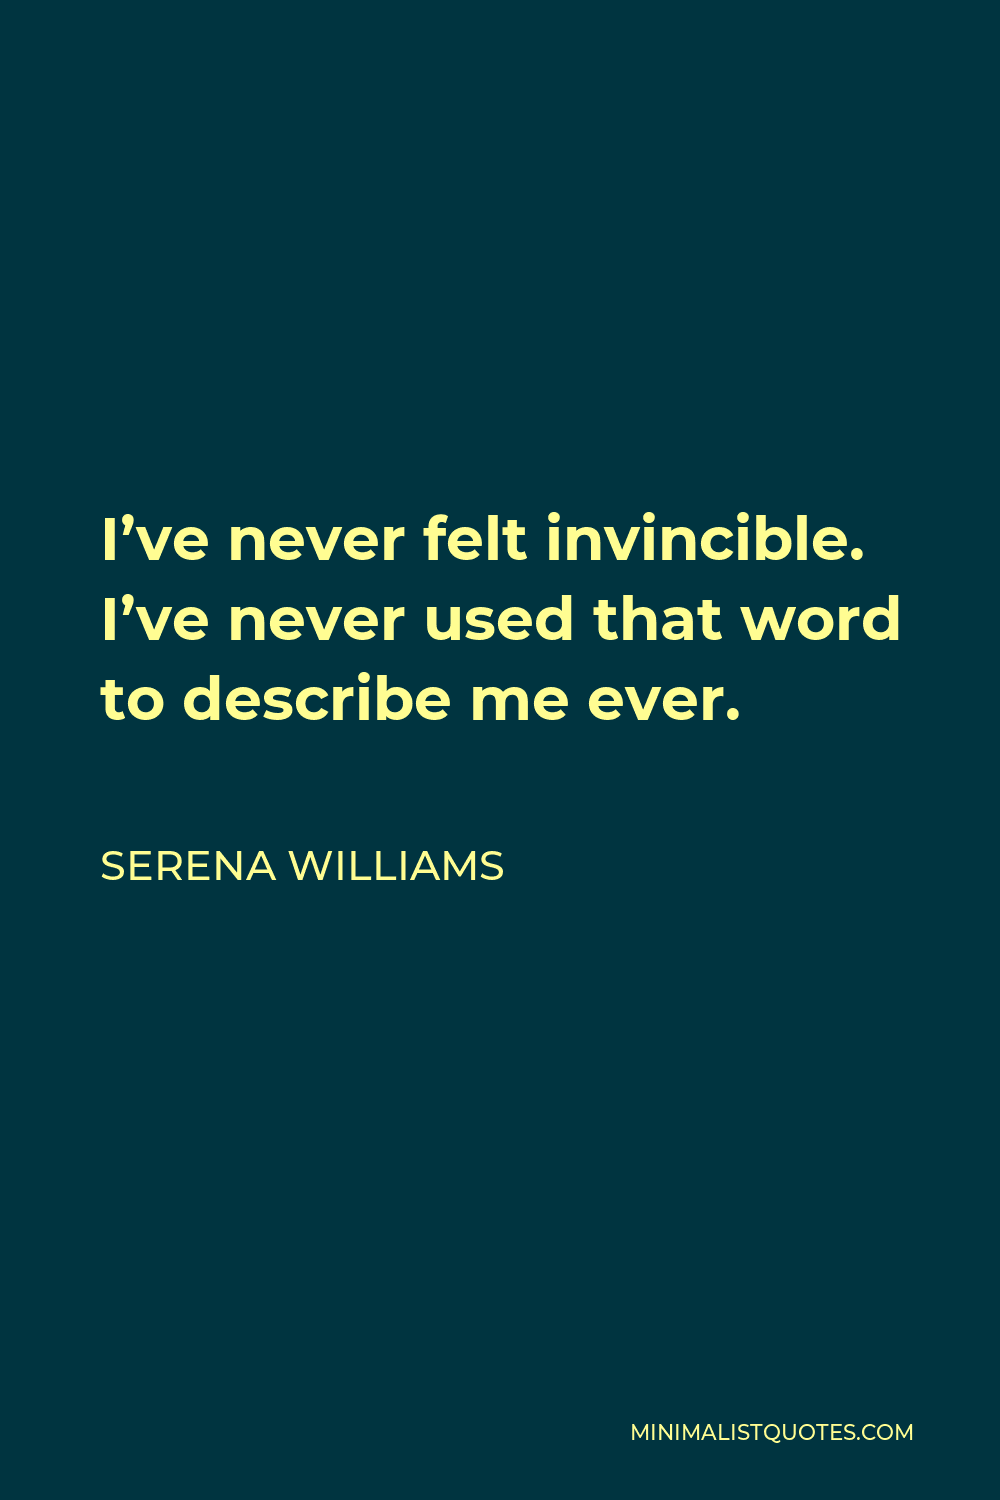 Serena Williams Quote - I’ve never felt invincible. I’ve never used that word to describe me ever.